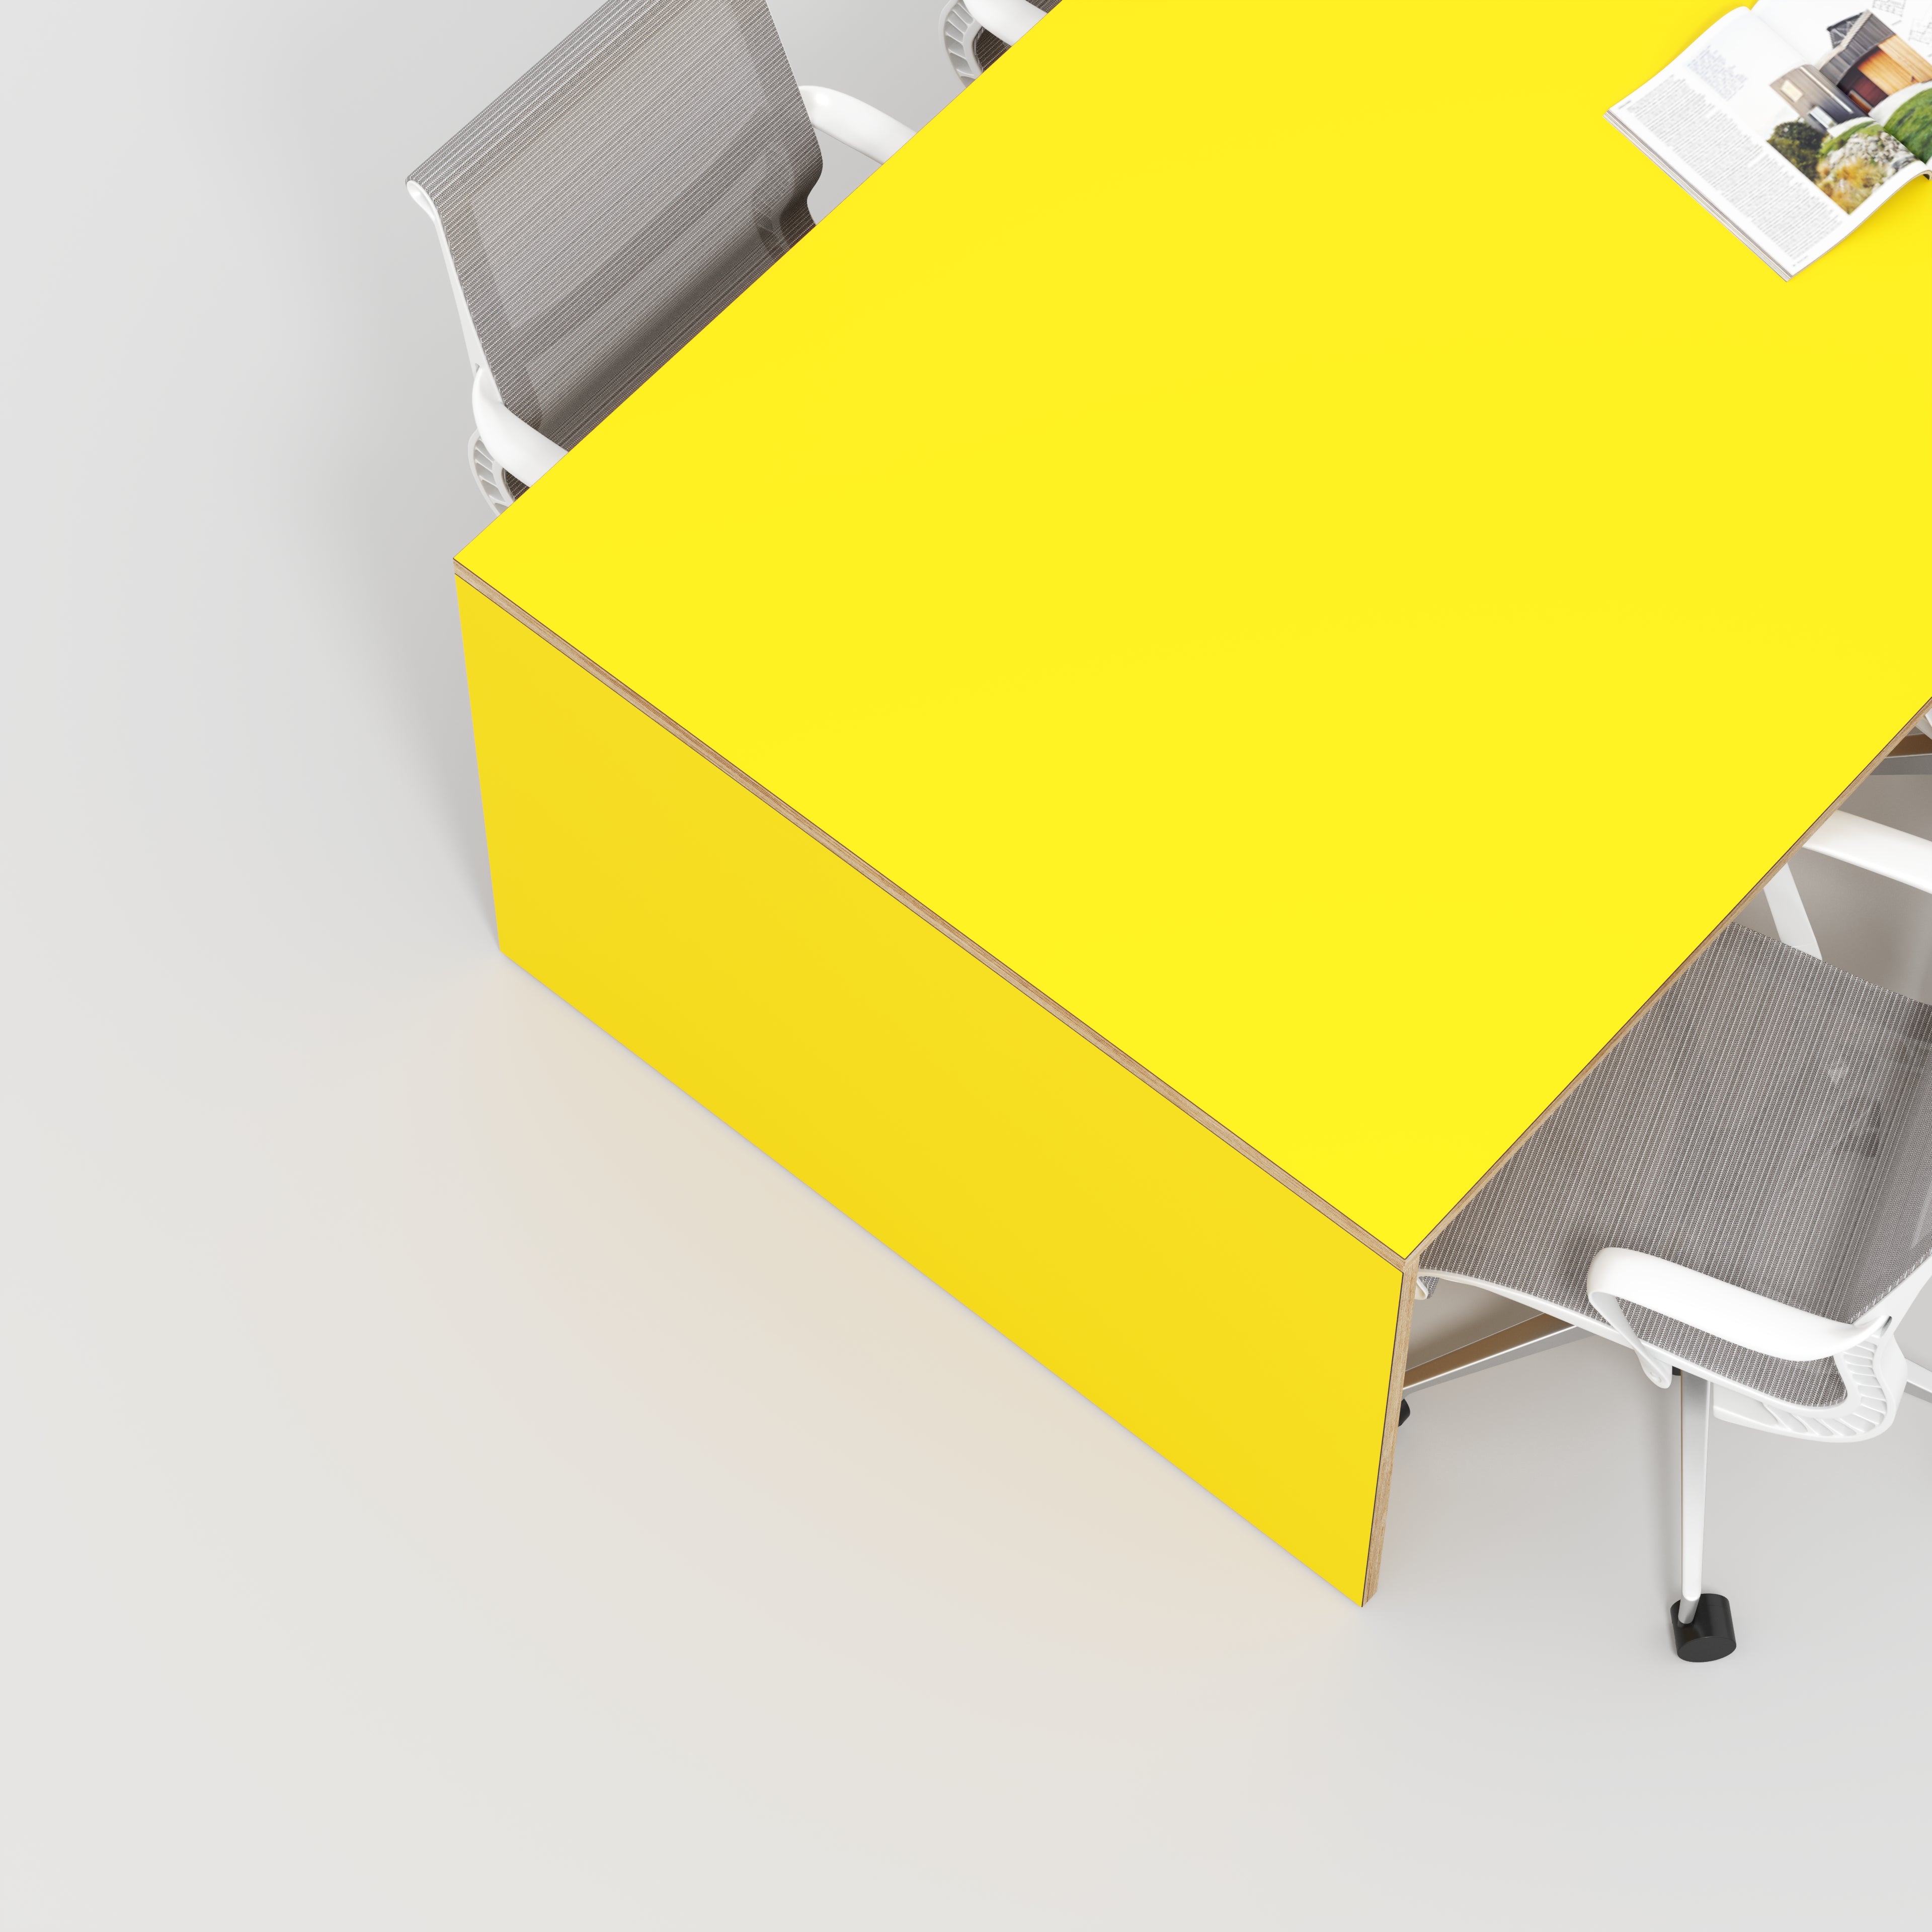 Table with Solid Sides - Formica Chrome Yellow - 2400(w) x 1200(d) x 750(h)